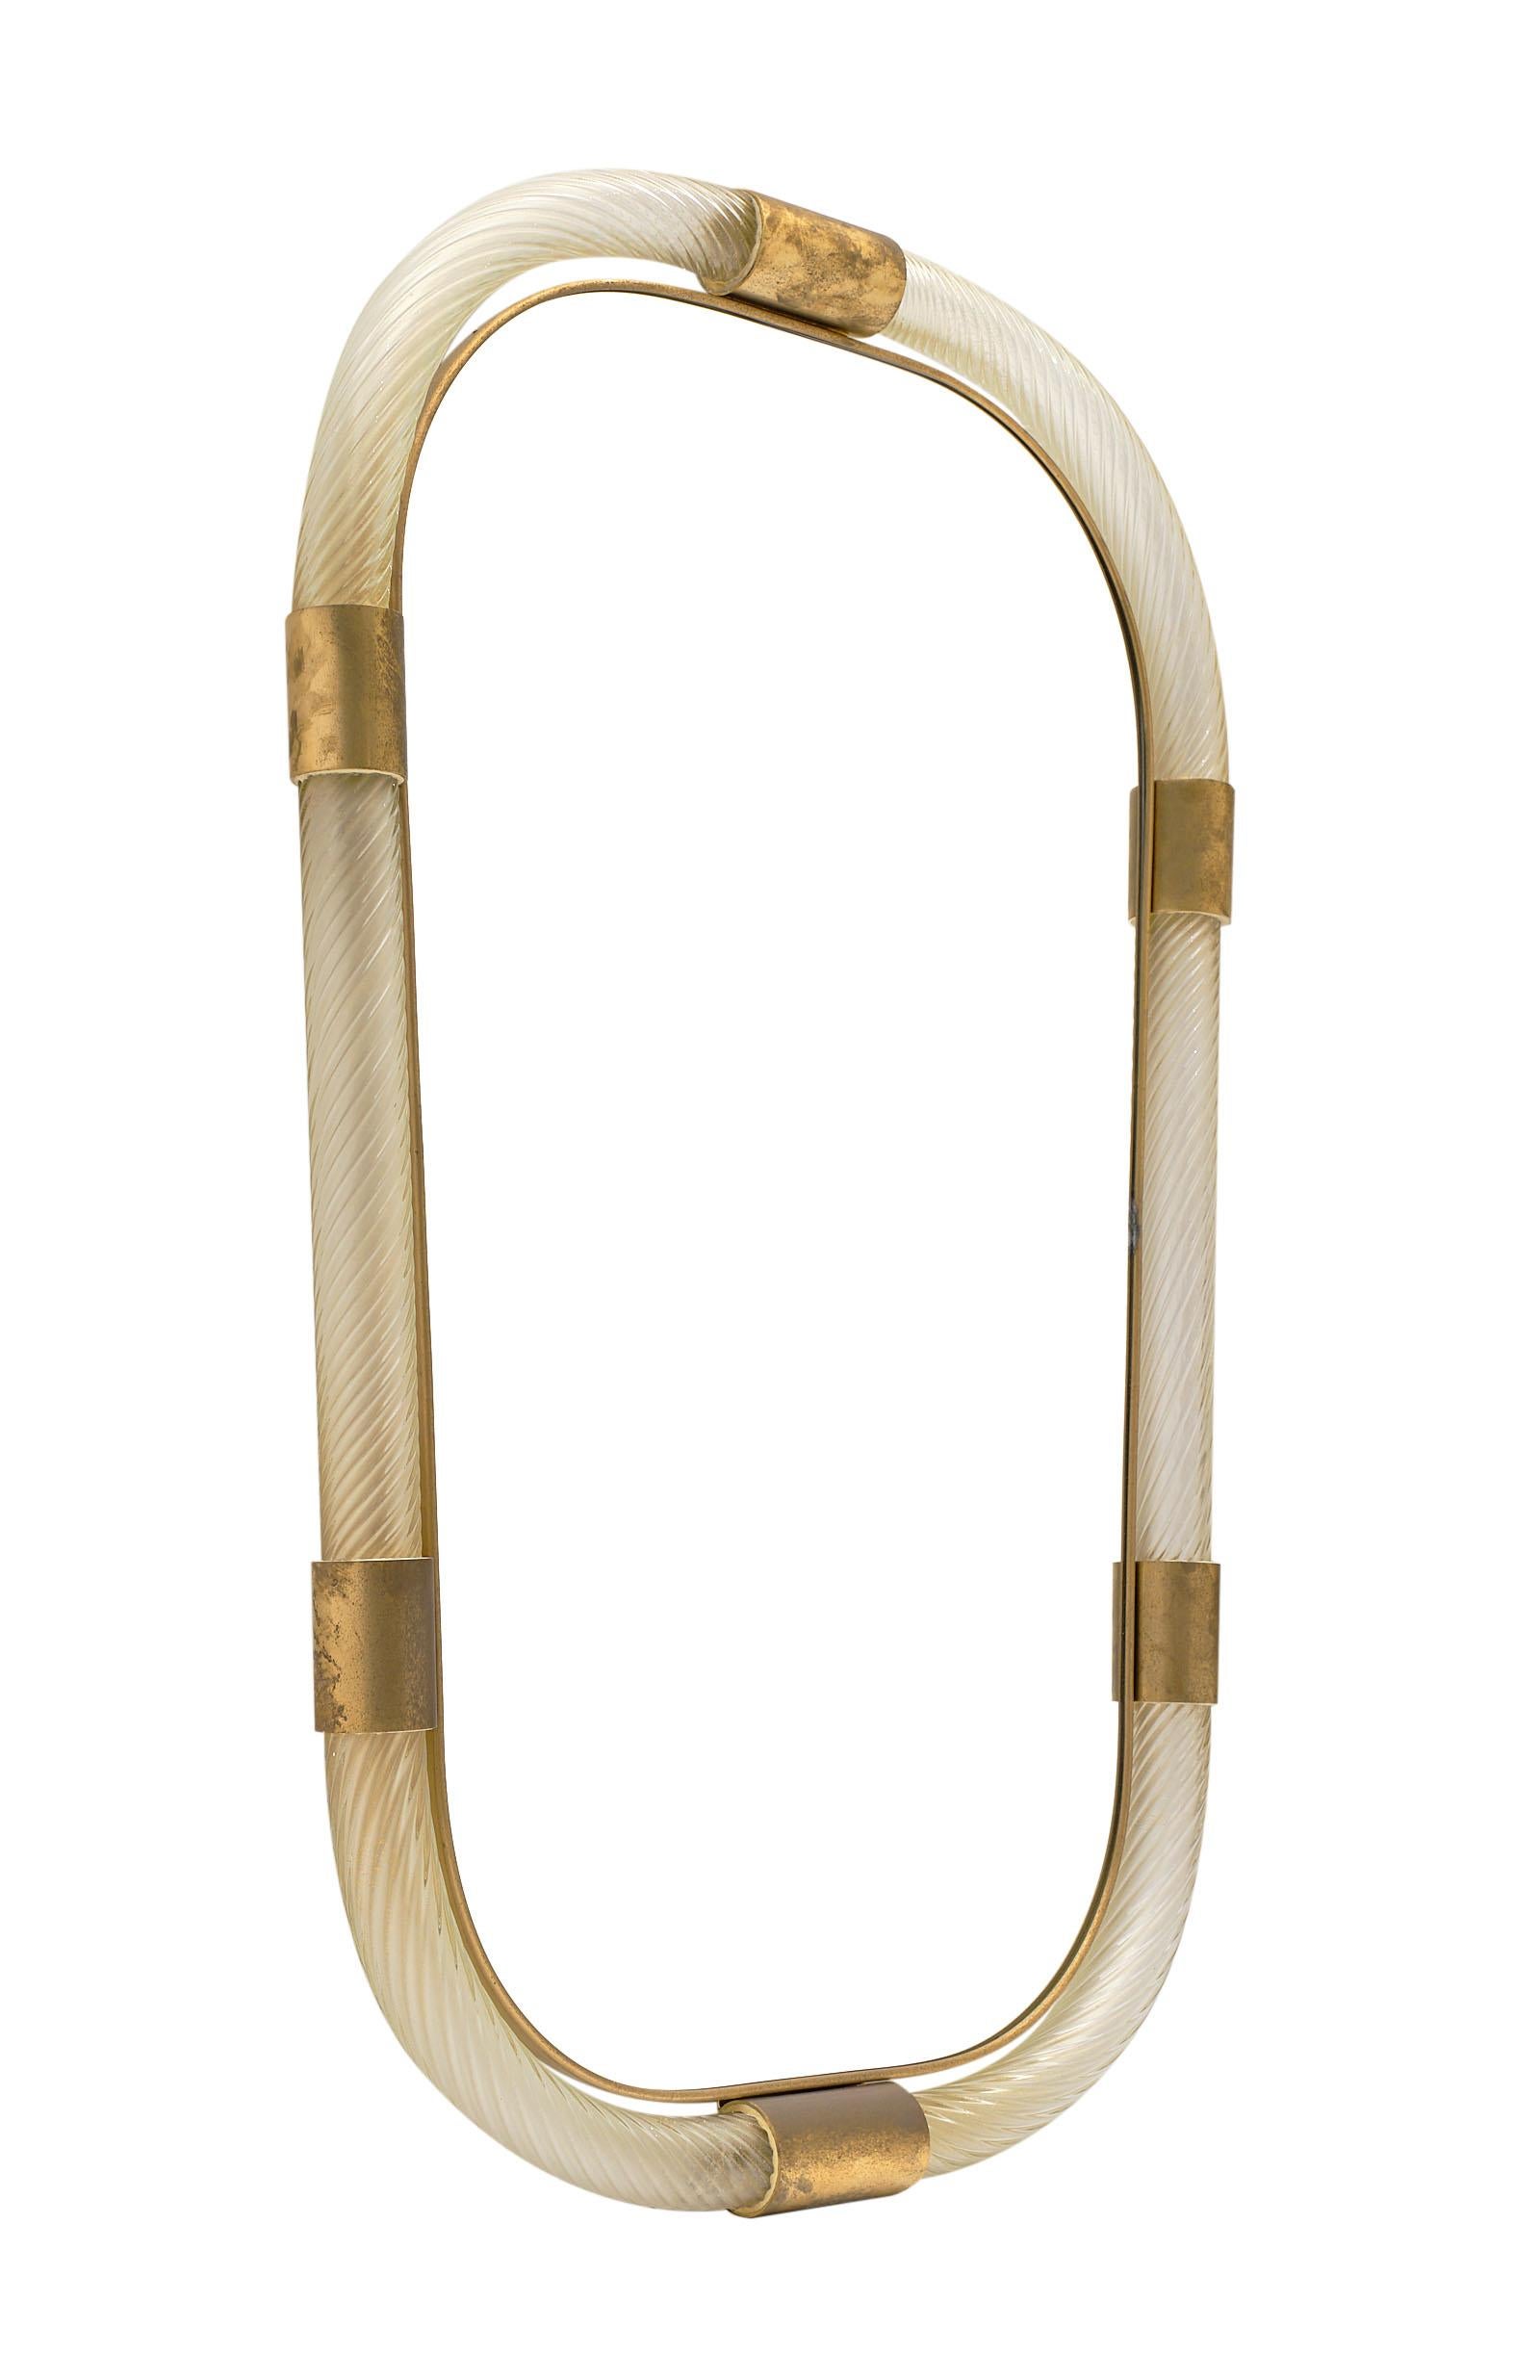 Murano glass and brass “torsado” mirror by Giuliano Fuga. We love the brass framed oblong glass mirror surrounded by hand blown “torsado” glass with 23 carat gold fused within. A striking mirror!

This piece is currently located at our dealer's